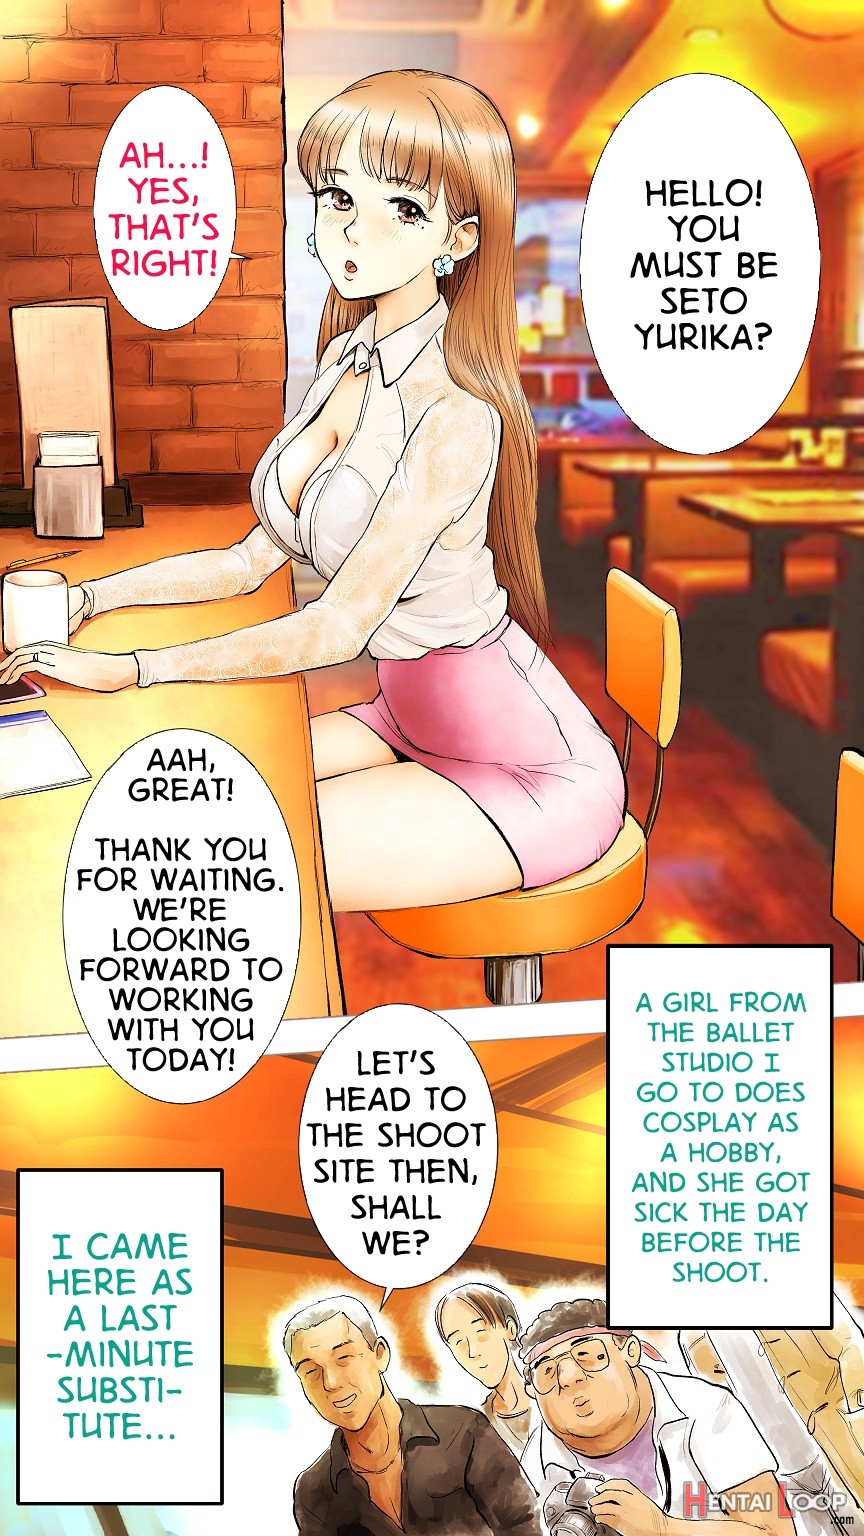 Read Porn-filming Story (by Aino) - Hentai doujinshi for free at HentaiLoop